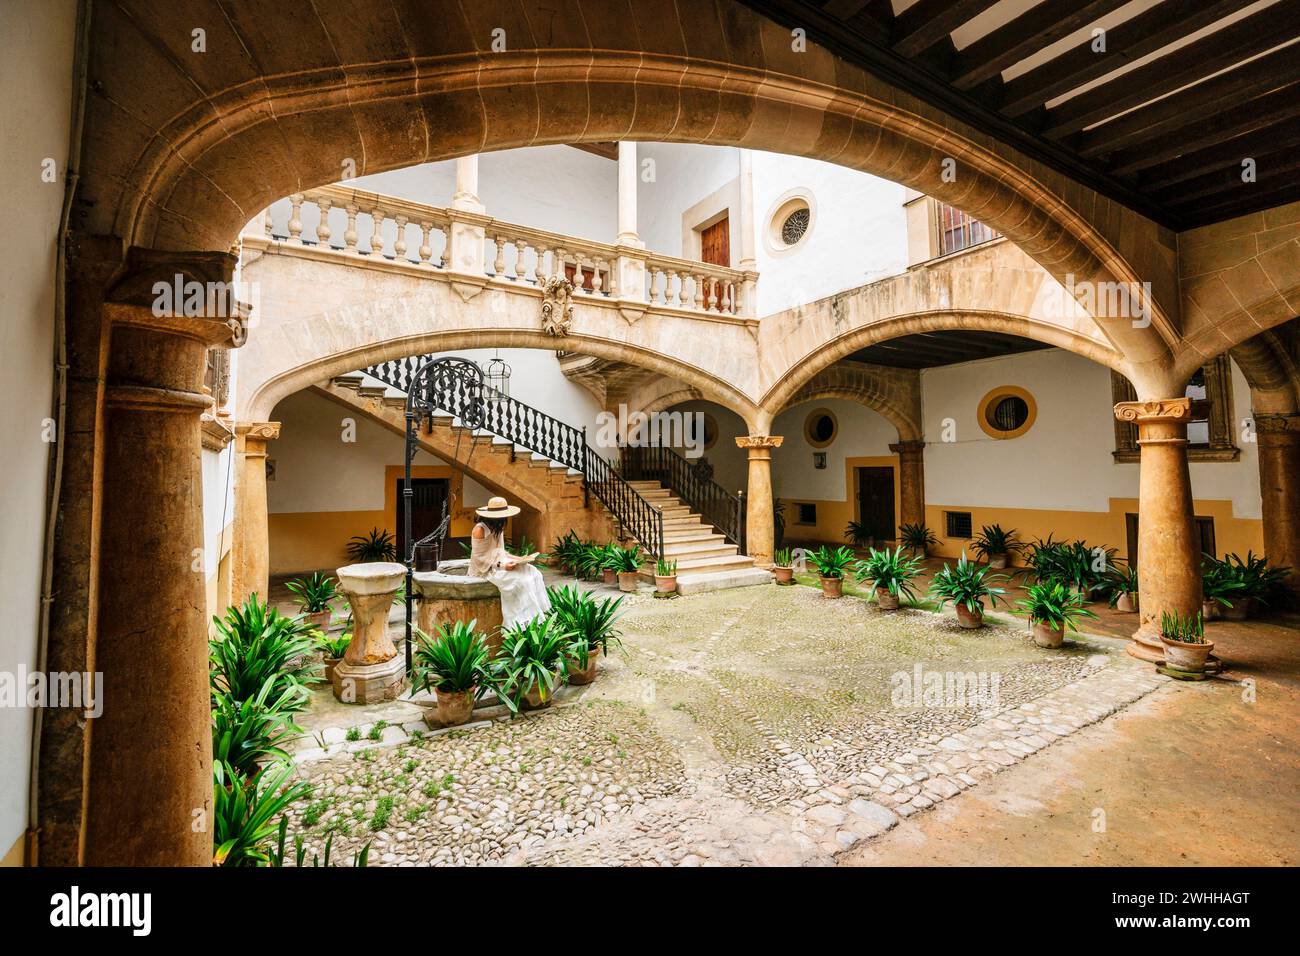 Can Oleza palace ordered to be built by the Descos family in the 15th century Stock Photo